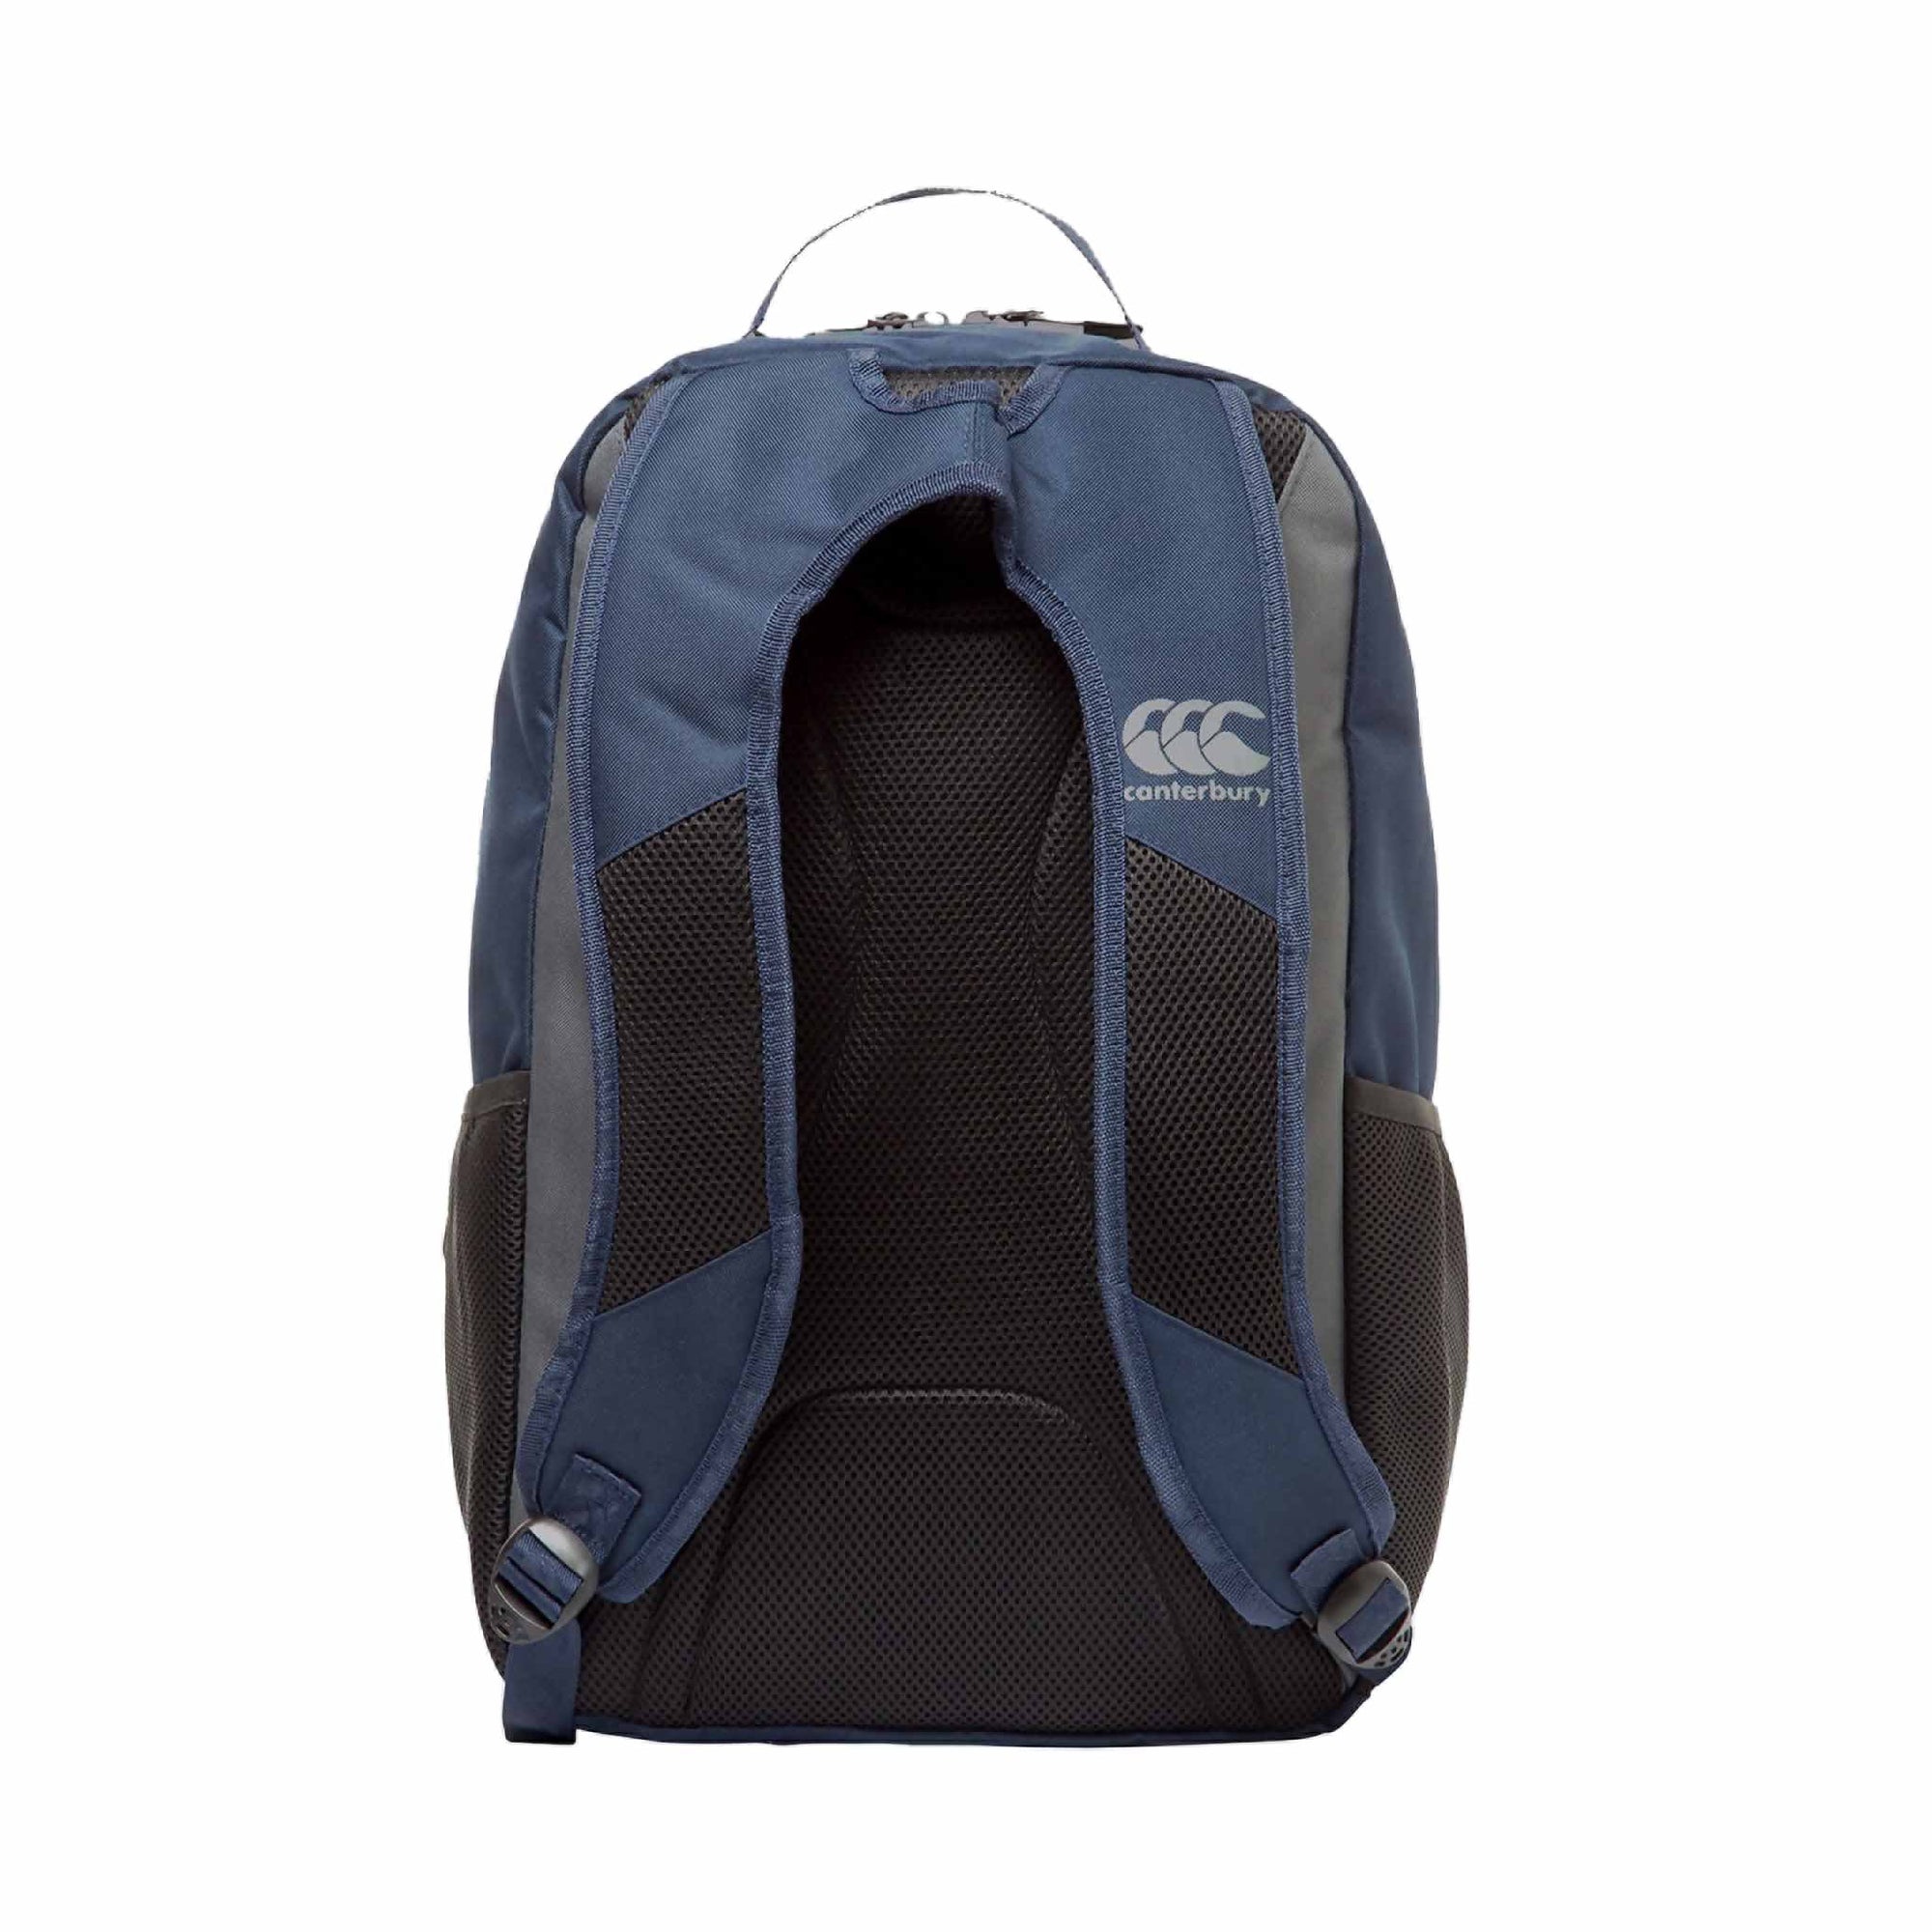 Canterbury-Classics-Backpack-Navy-TheRugbyShop